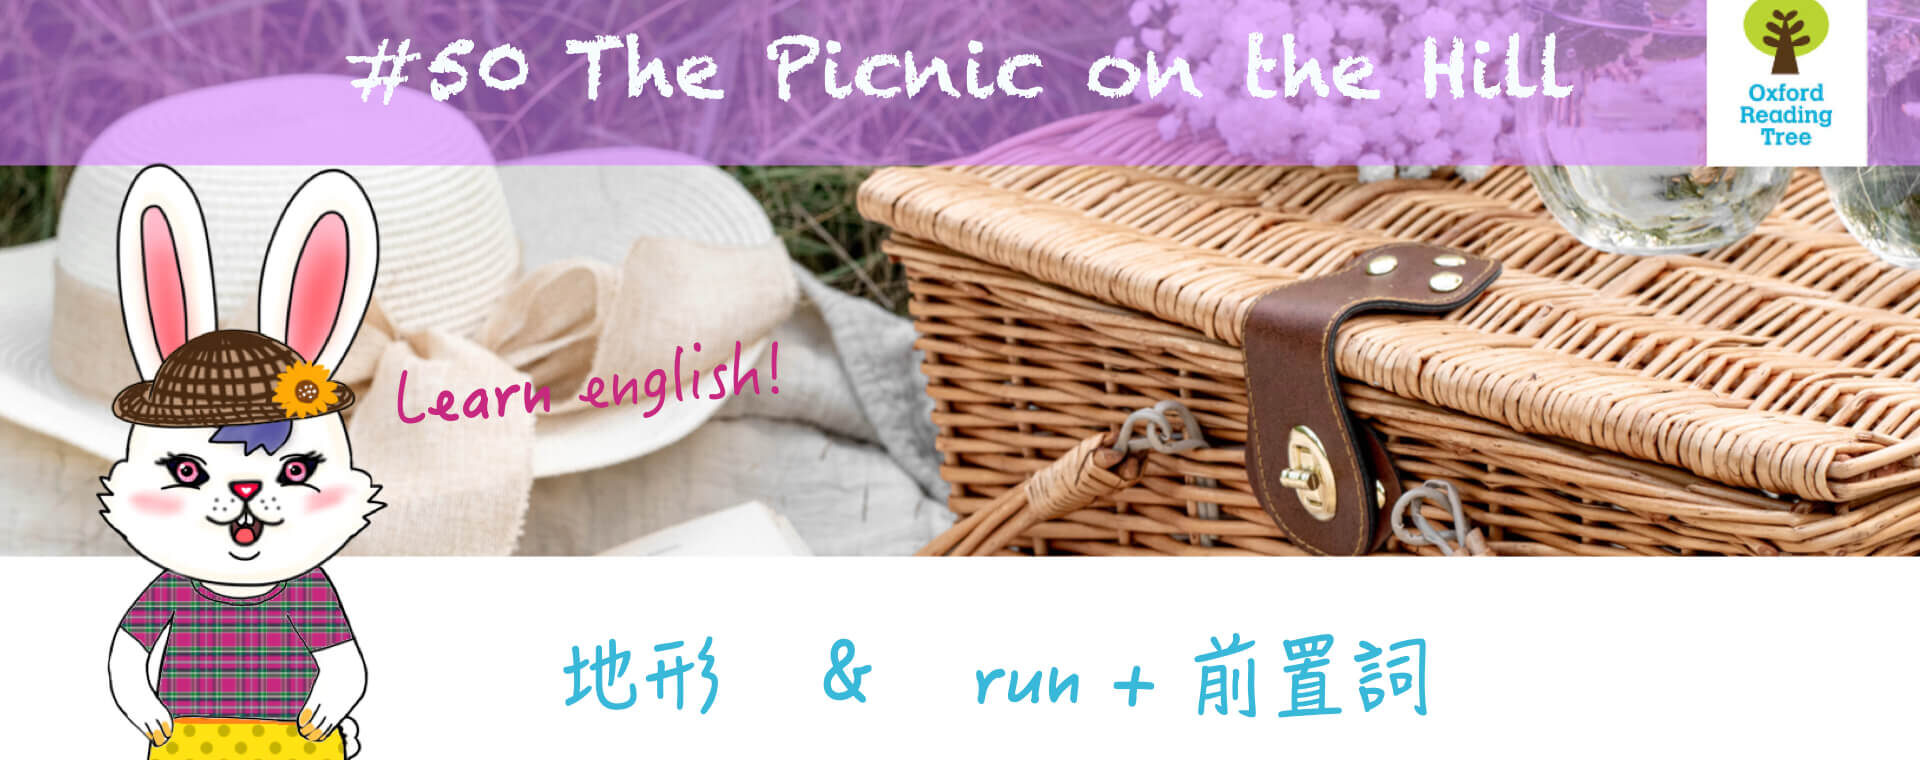 #50 The Picnic on the Hill thumbnail